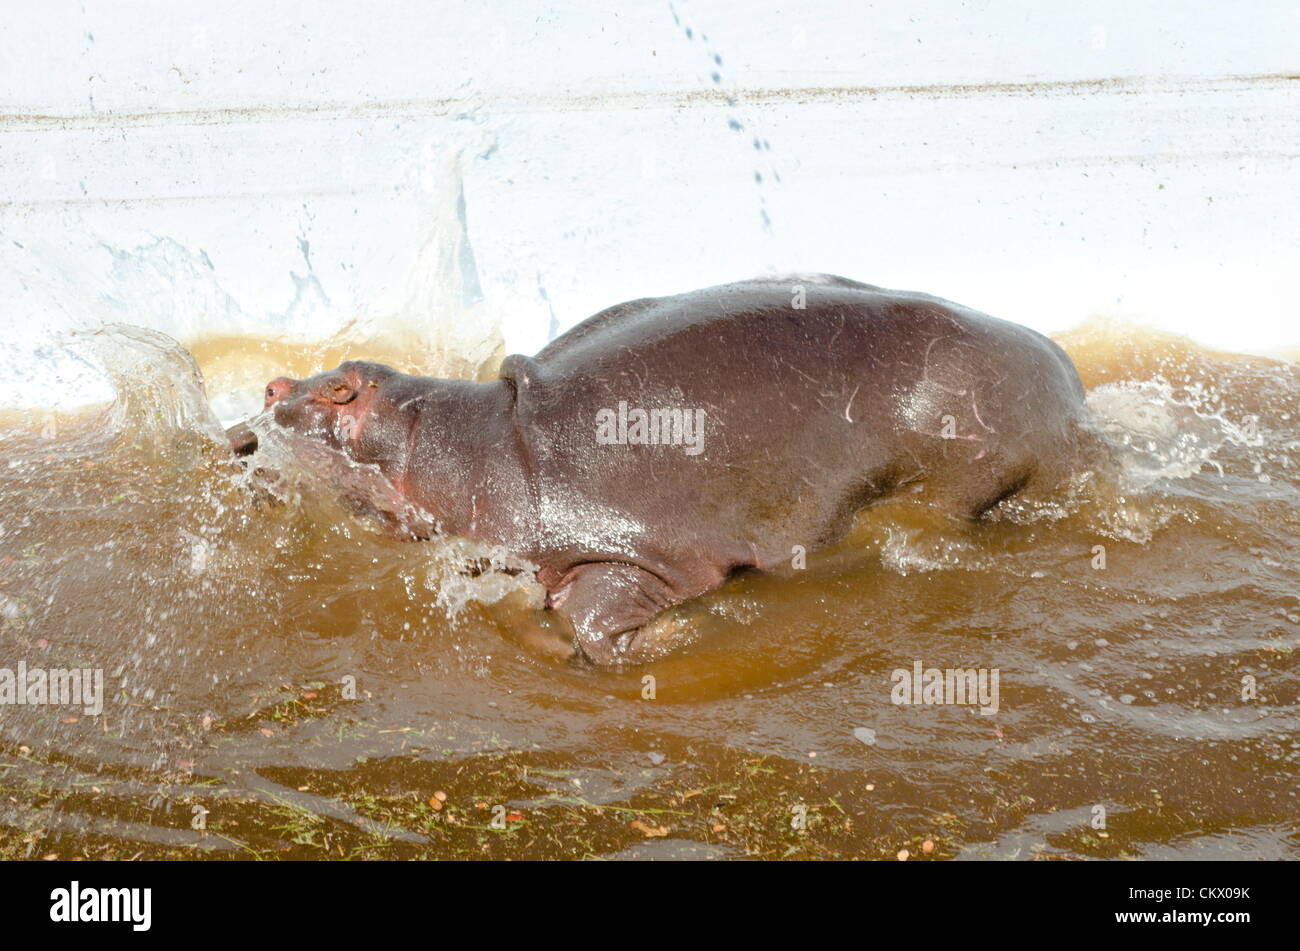 24th Aug 2012. MODIMOLLE, SOUTH AFRICA: A young hippo bull named Solly who was trapped in a swimming pool on a game farm near Modimolle for three days, has died during a rescue attempt in Limpopo, South Africa. The bull was apparently kicked out of its family group by more dominant males. (Photo by Gallo Images / Franco Megannon/Alamy Live News) Stock Photo